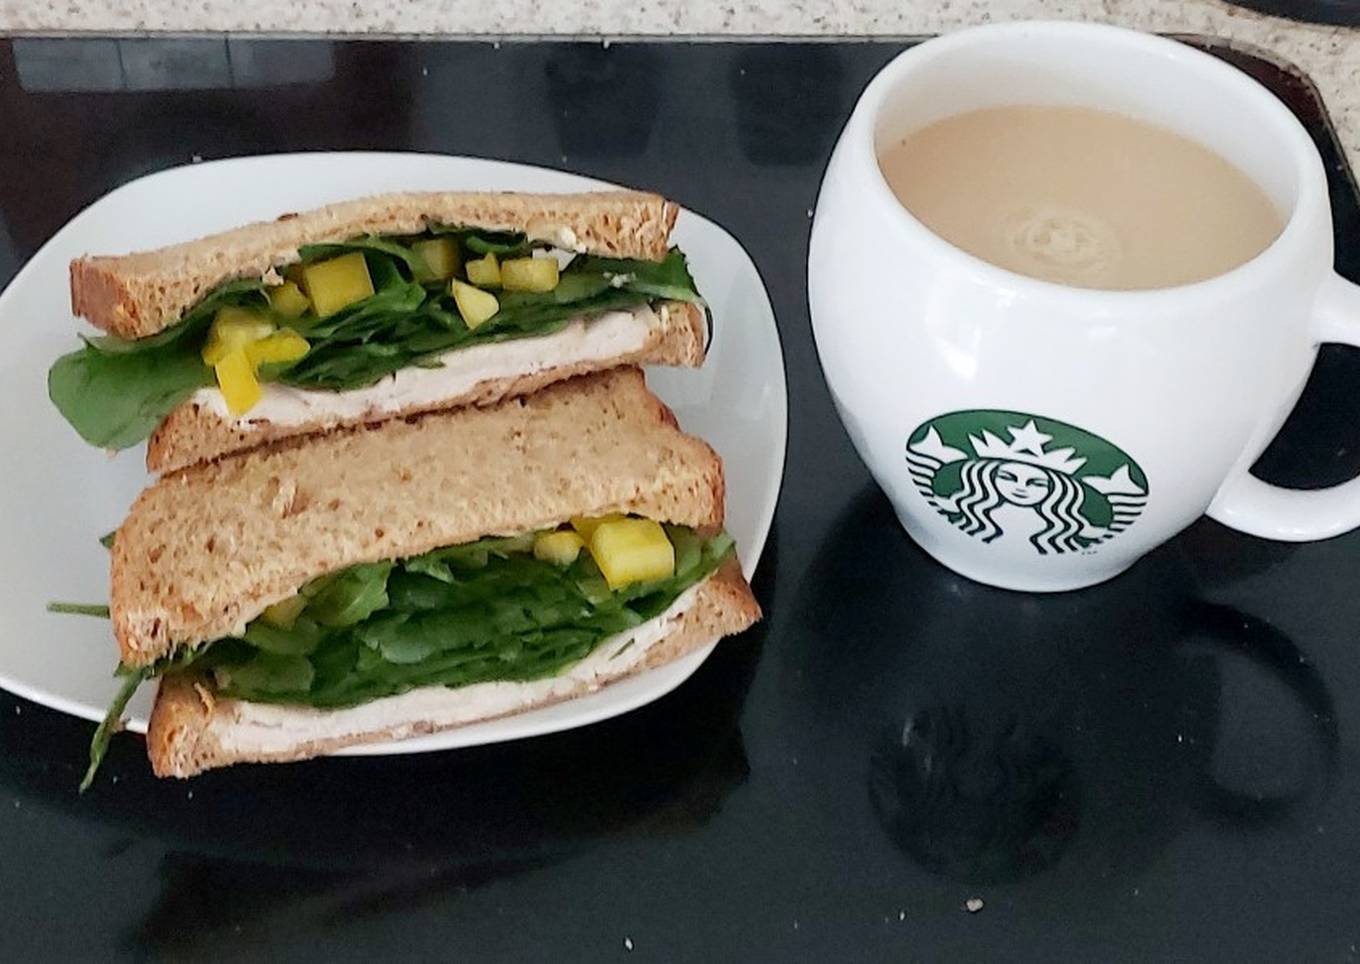 My Sliced Chicken with Spinach and Yellow Sweet Pepper Sandwich